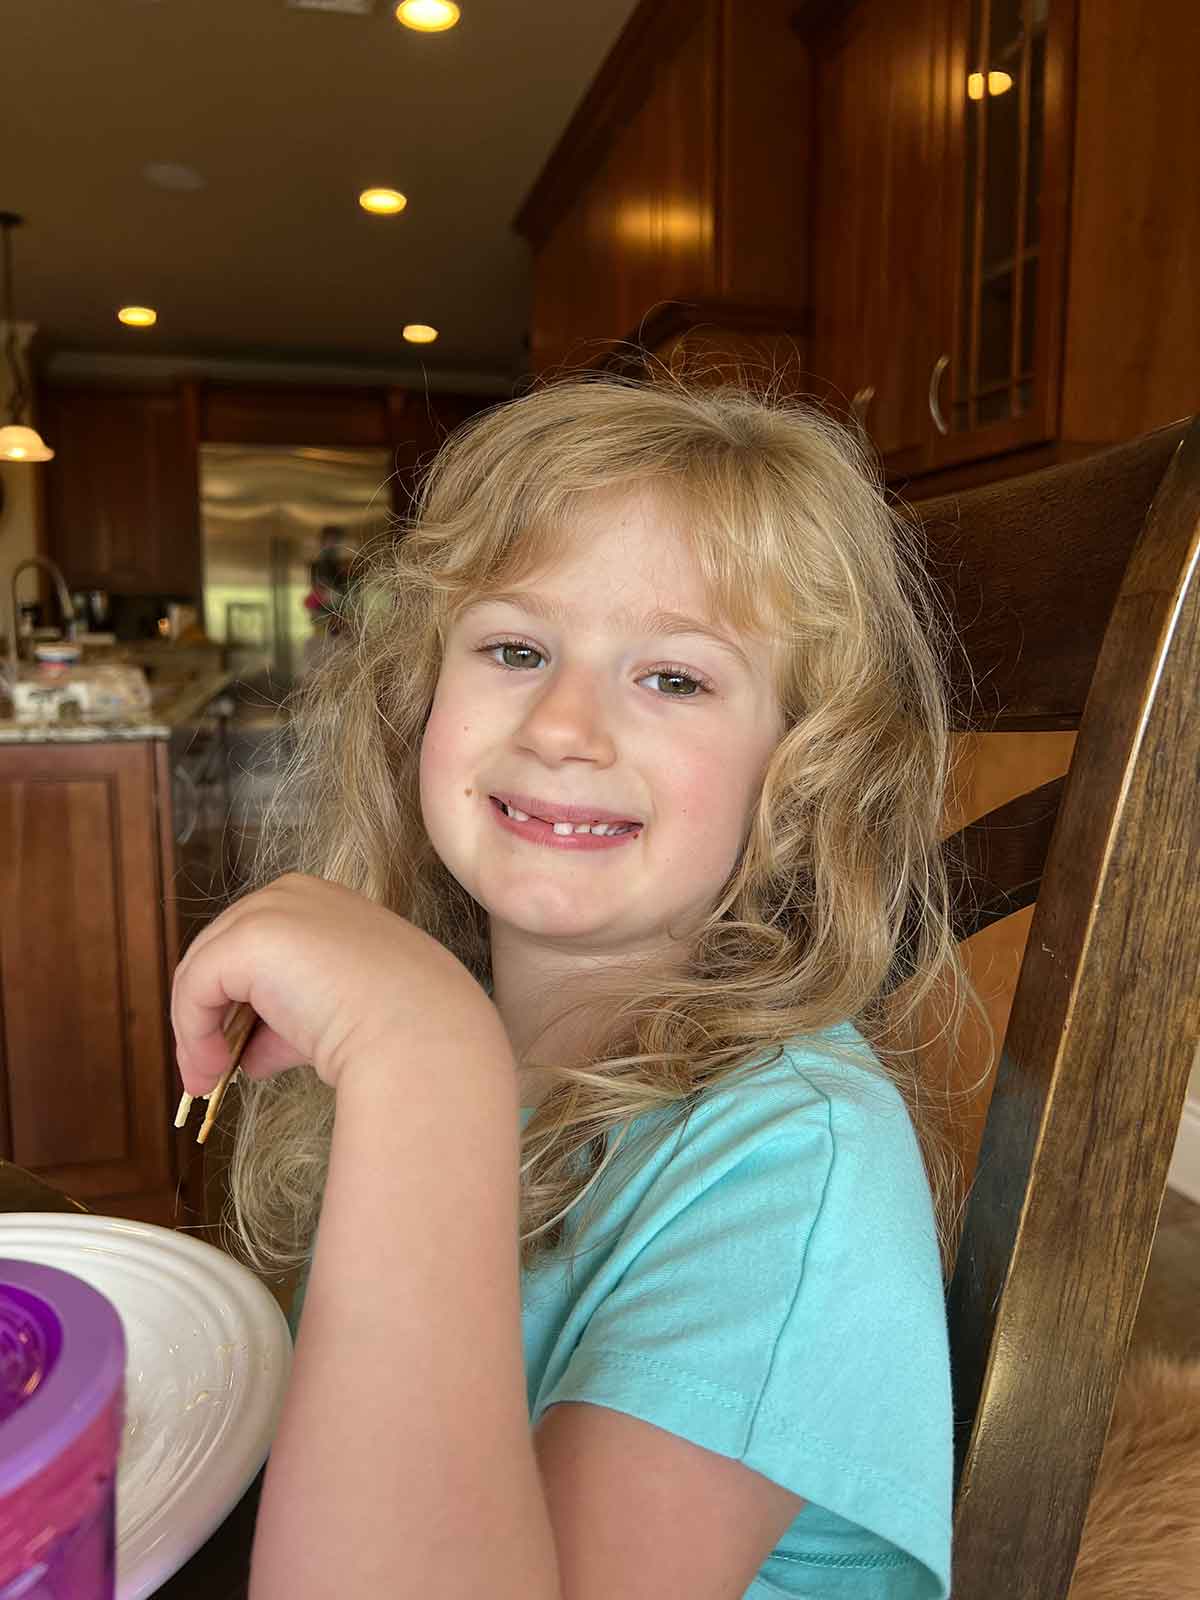 Little girl sitting in a kitchen chair smiling at the camera.